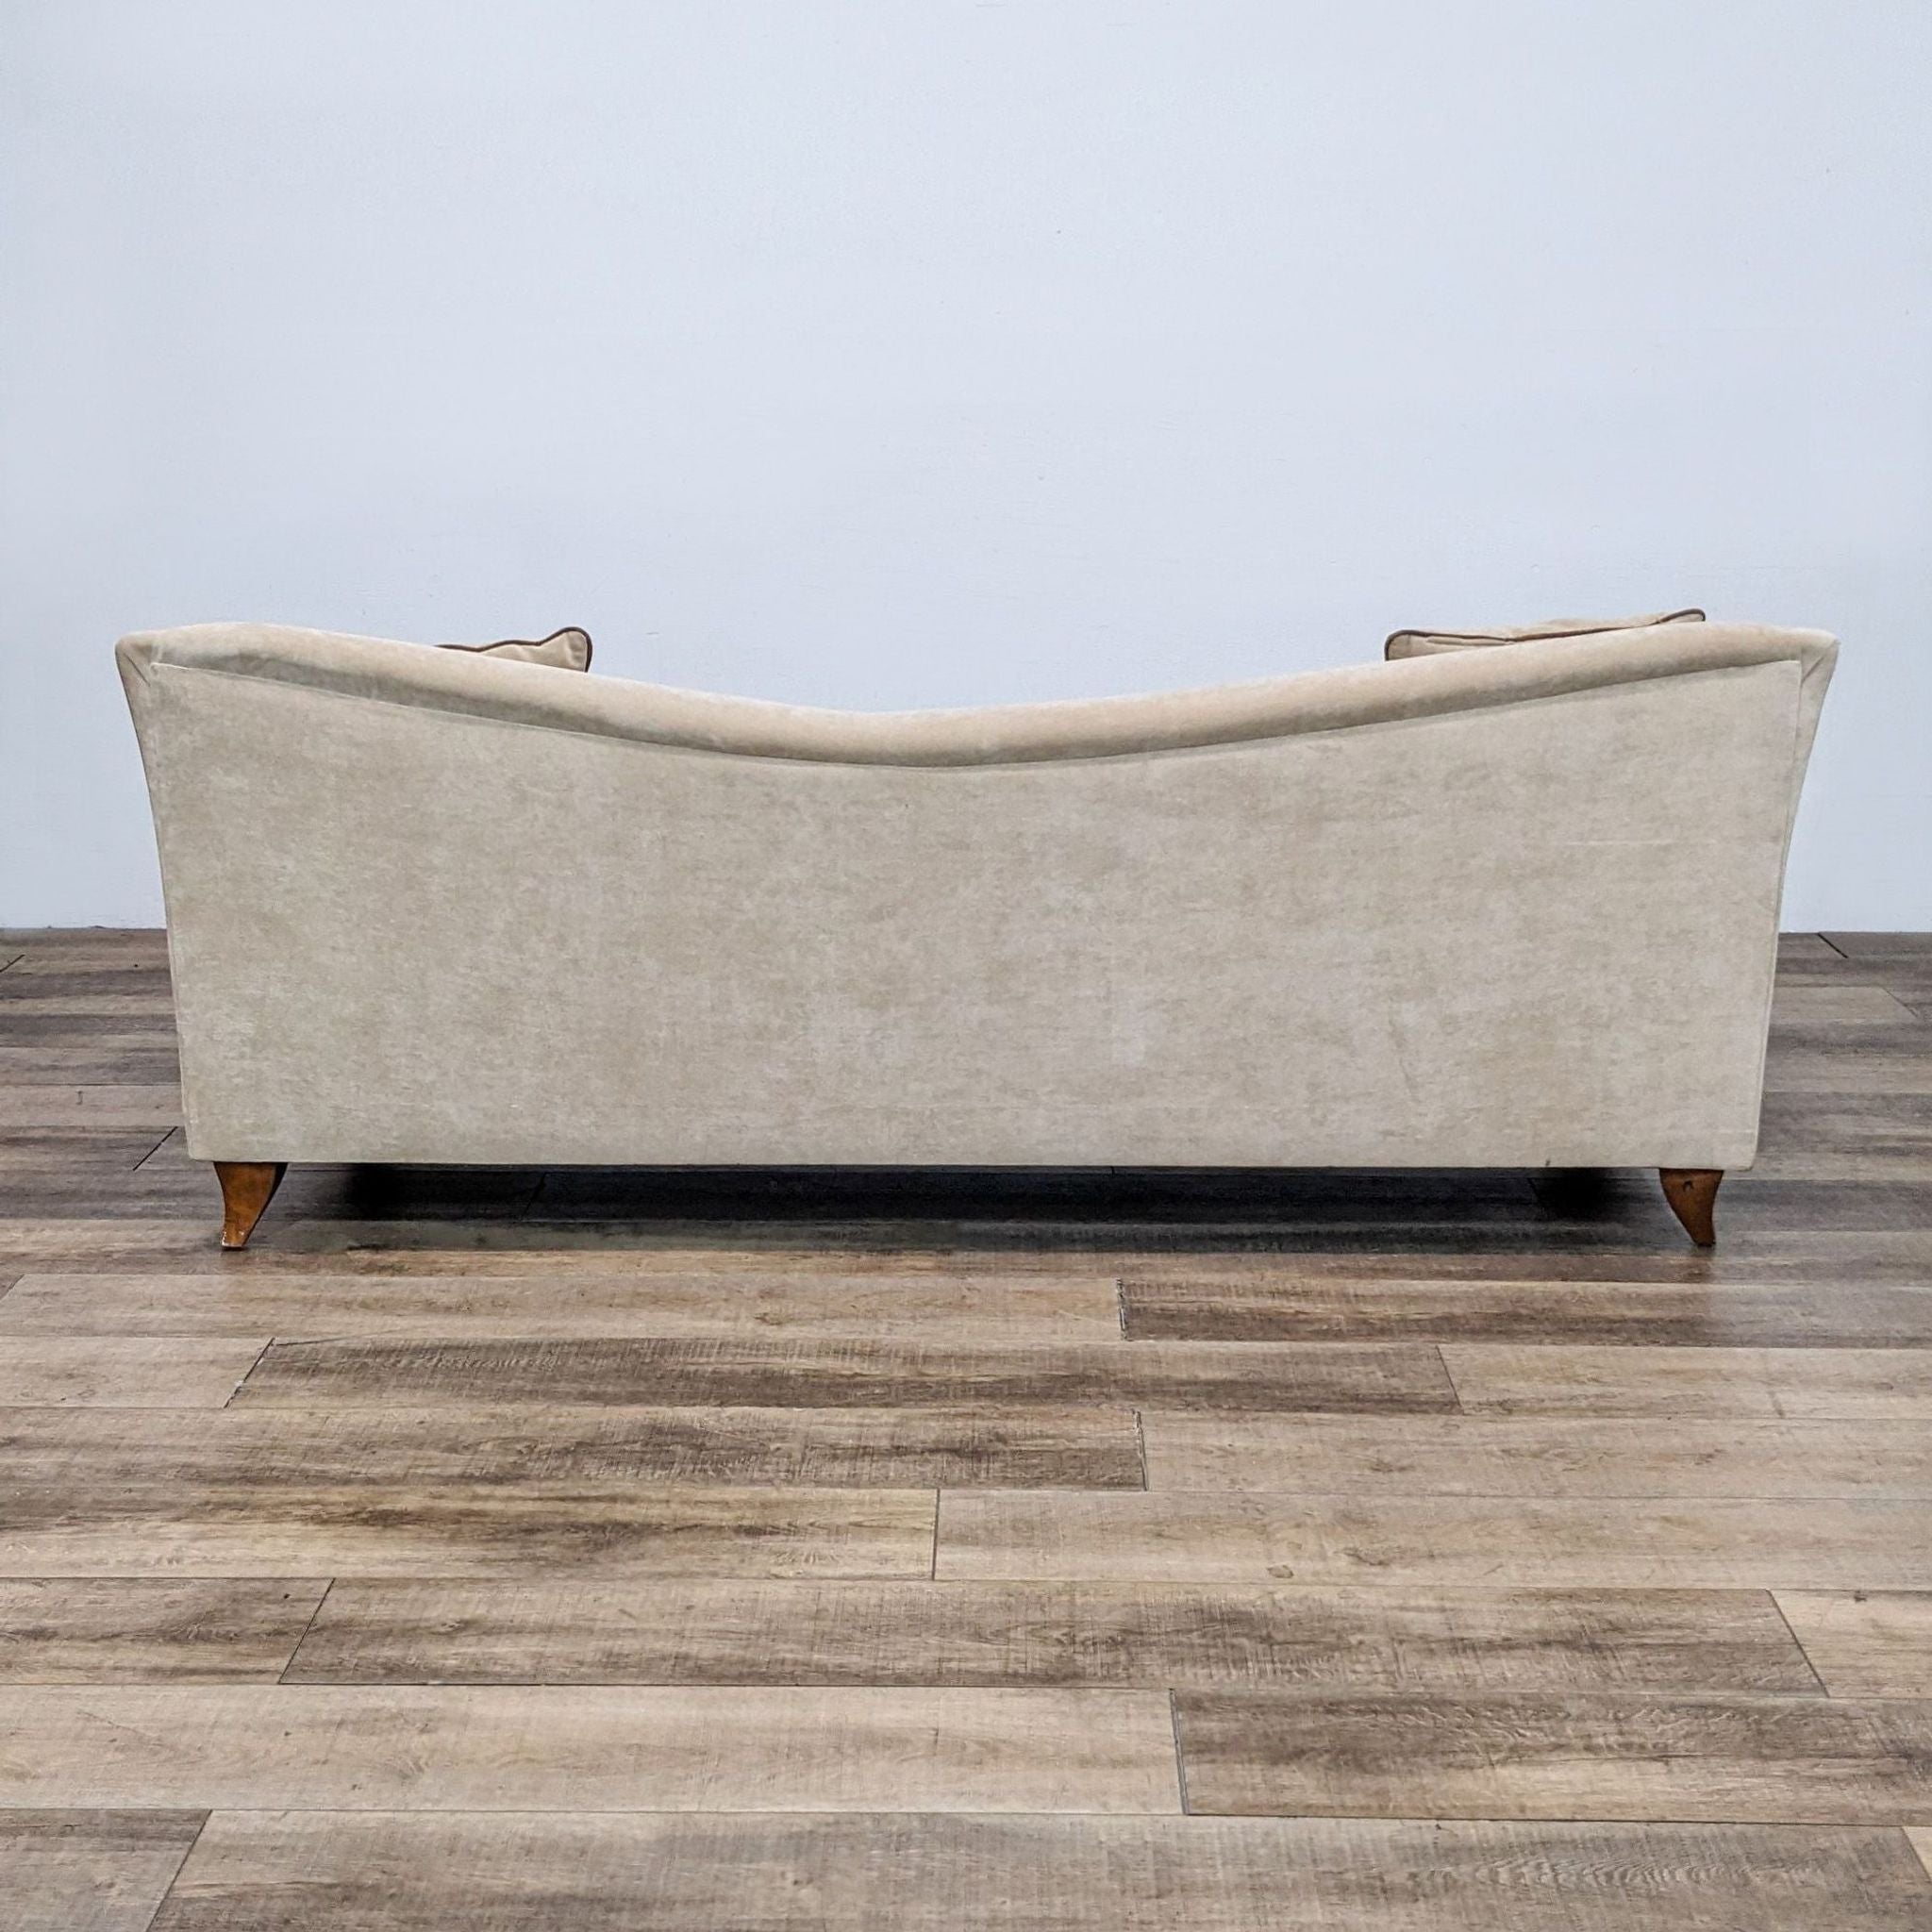 Rear view of a Reperch 3-seat fabric sofa showing its curved back and wooden feet on a wooden floor.